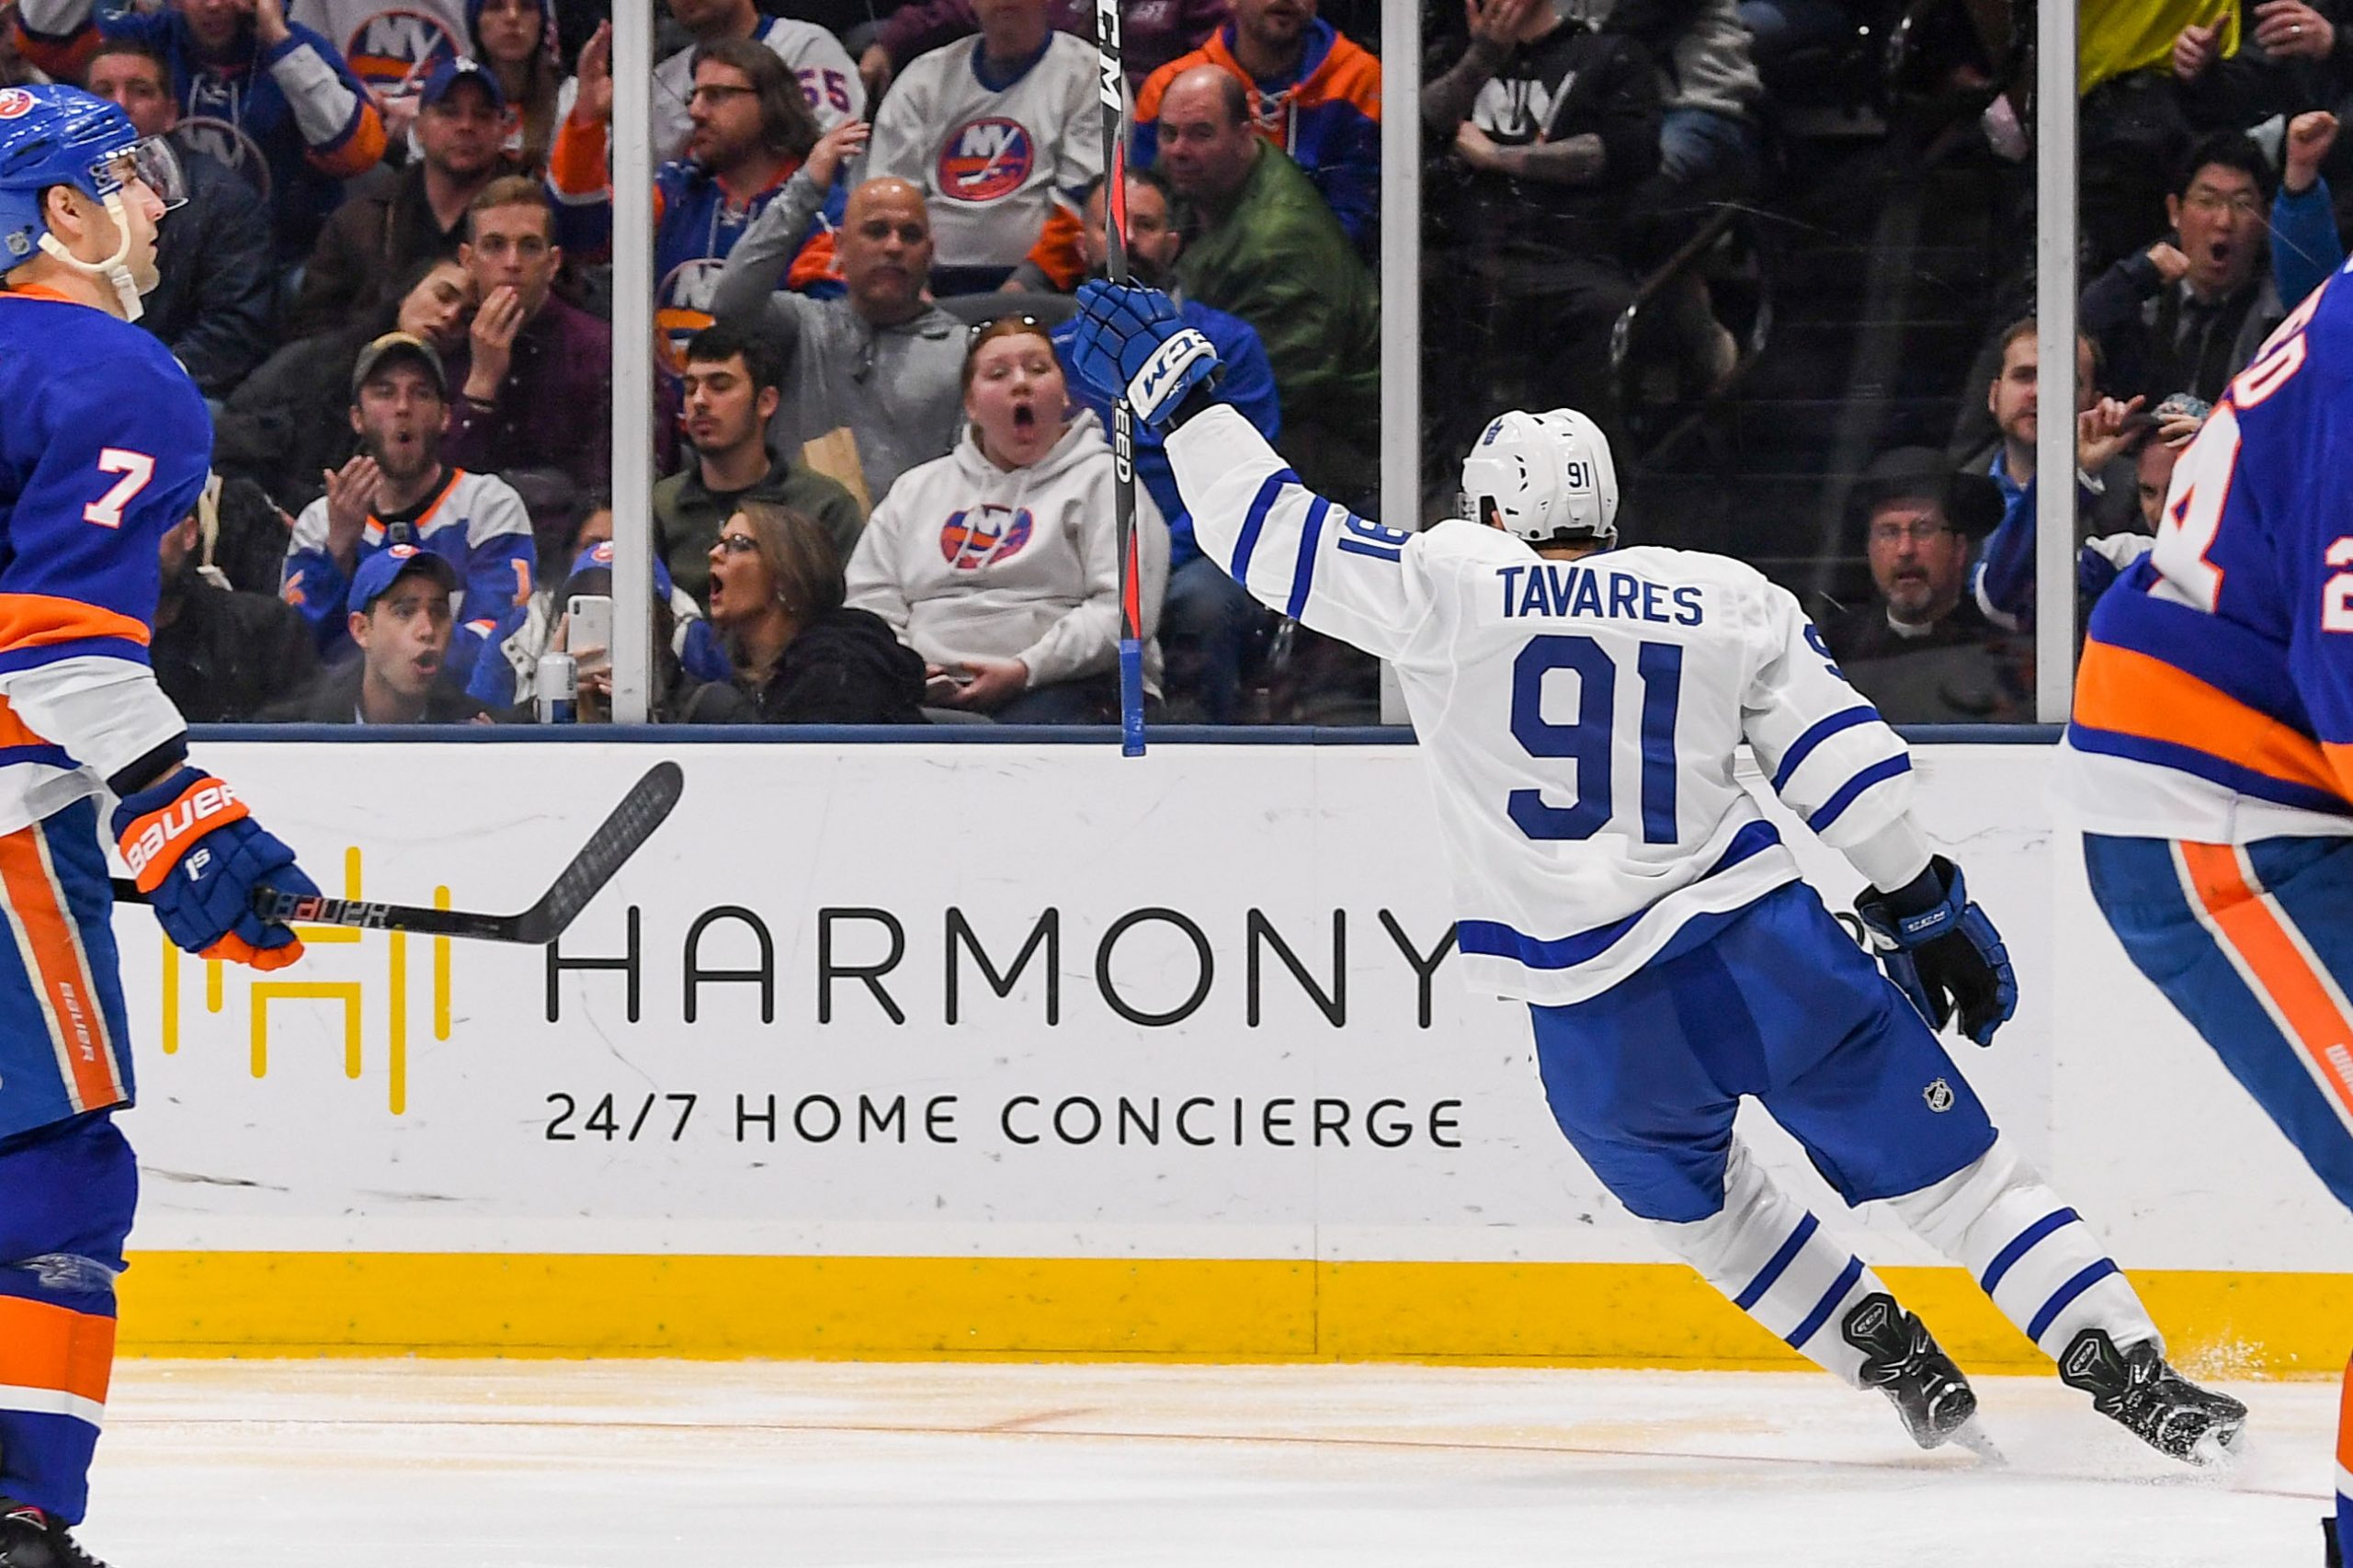 Apr 1, 2019; Uniondale, NY, USA; Toronto Maple Leafs center John Tavares (91) celebrates his goal against the New York Islanders during the third period at Nassau Veterans Memorial Coliseum. Mandatory Credit: Dennis Schneidler-USA TODAY Sports